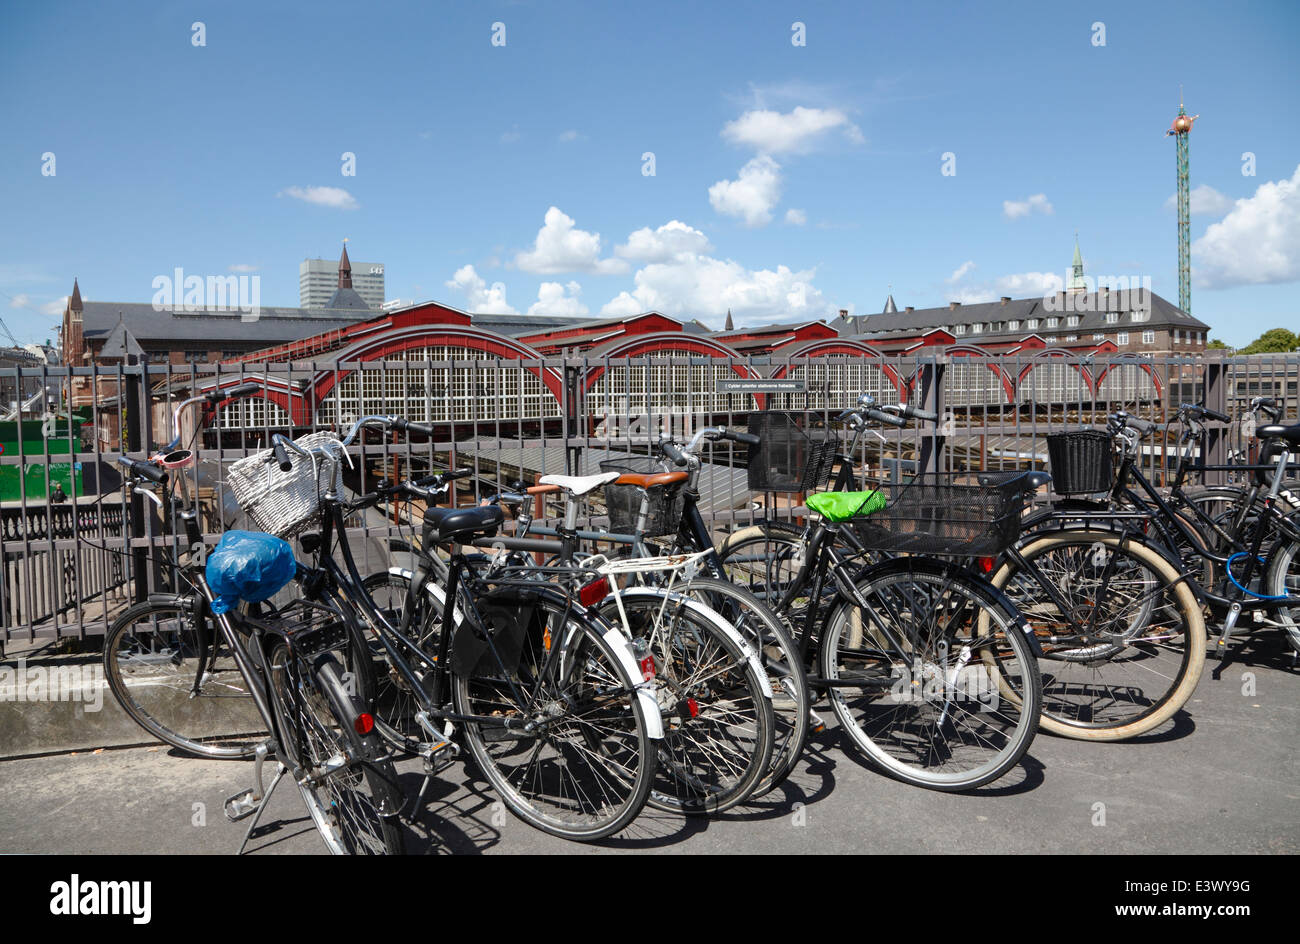 S Train Station Copenhagen High Resolution Stock Photography and Images -  Alamy